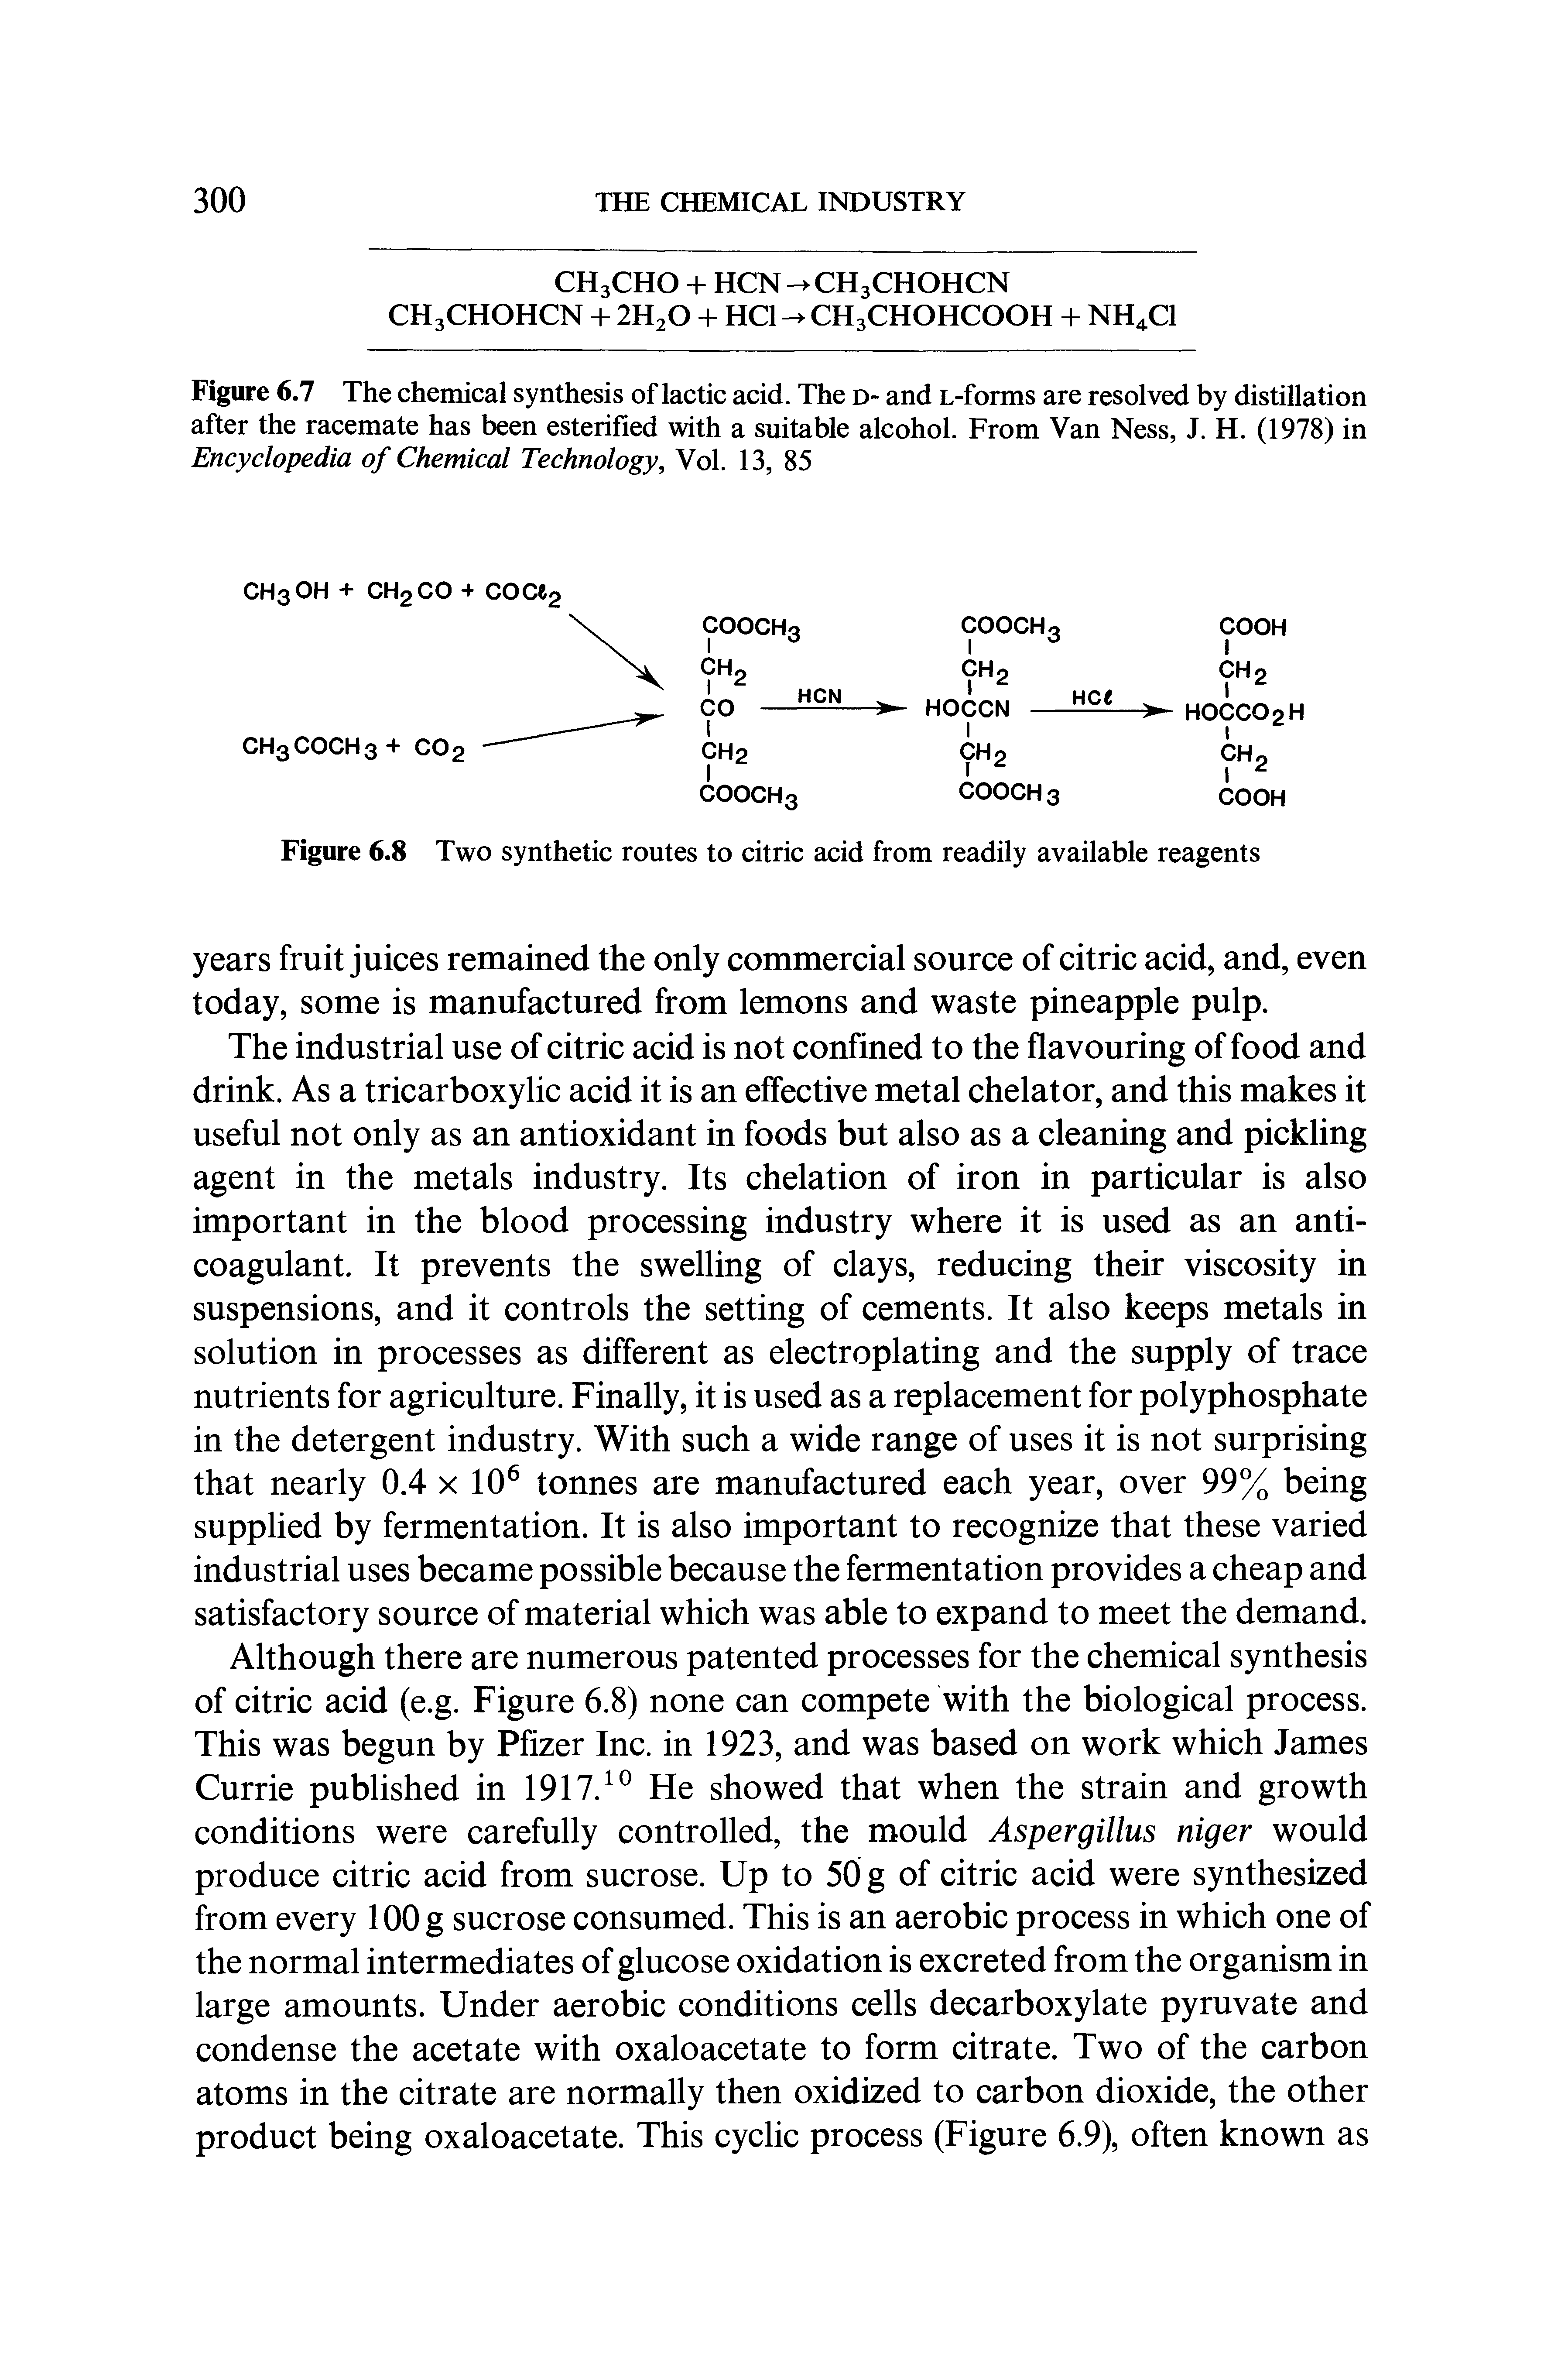 Figure 6.7 The chemical synthesis of lactic acid. The d- and L-forms are resolved by distillation after the racemate has been esterified with a suitable alcohol. From Van Ness, J. H. (1978) in Encyclopedia of Chemical Technology, Vol. 13, 85...